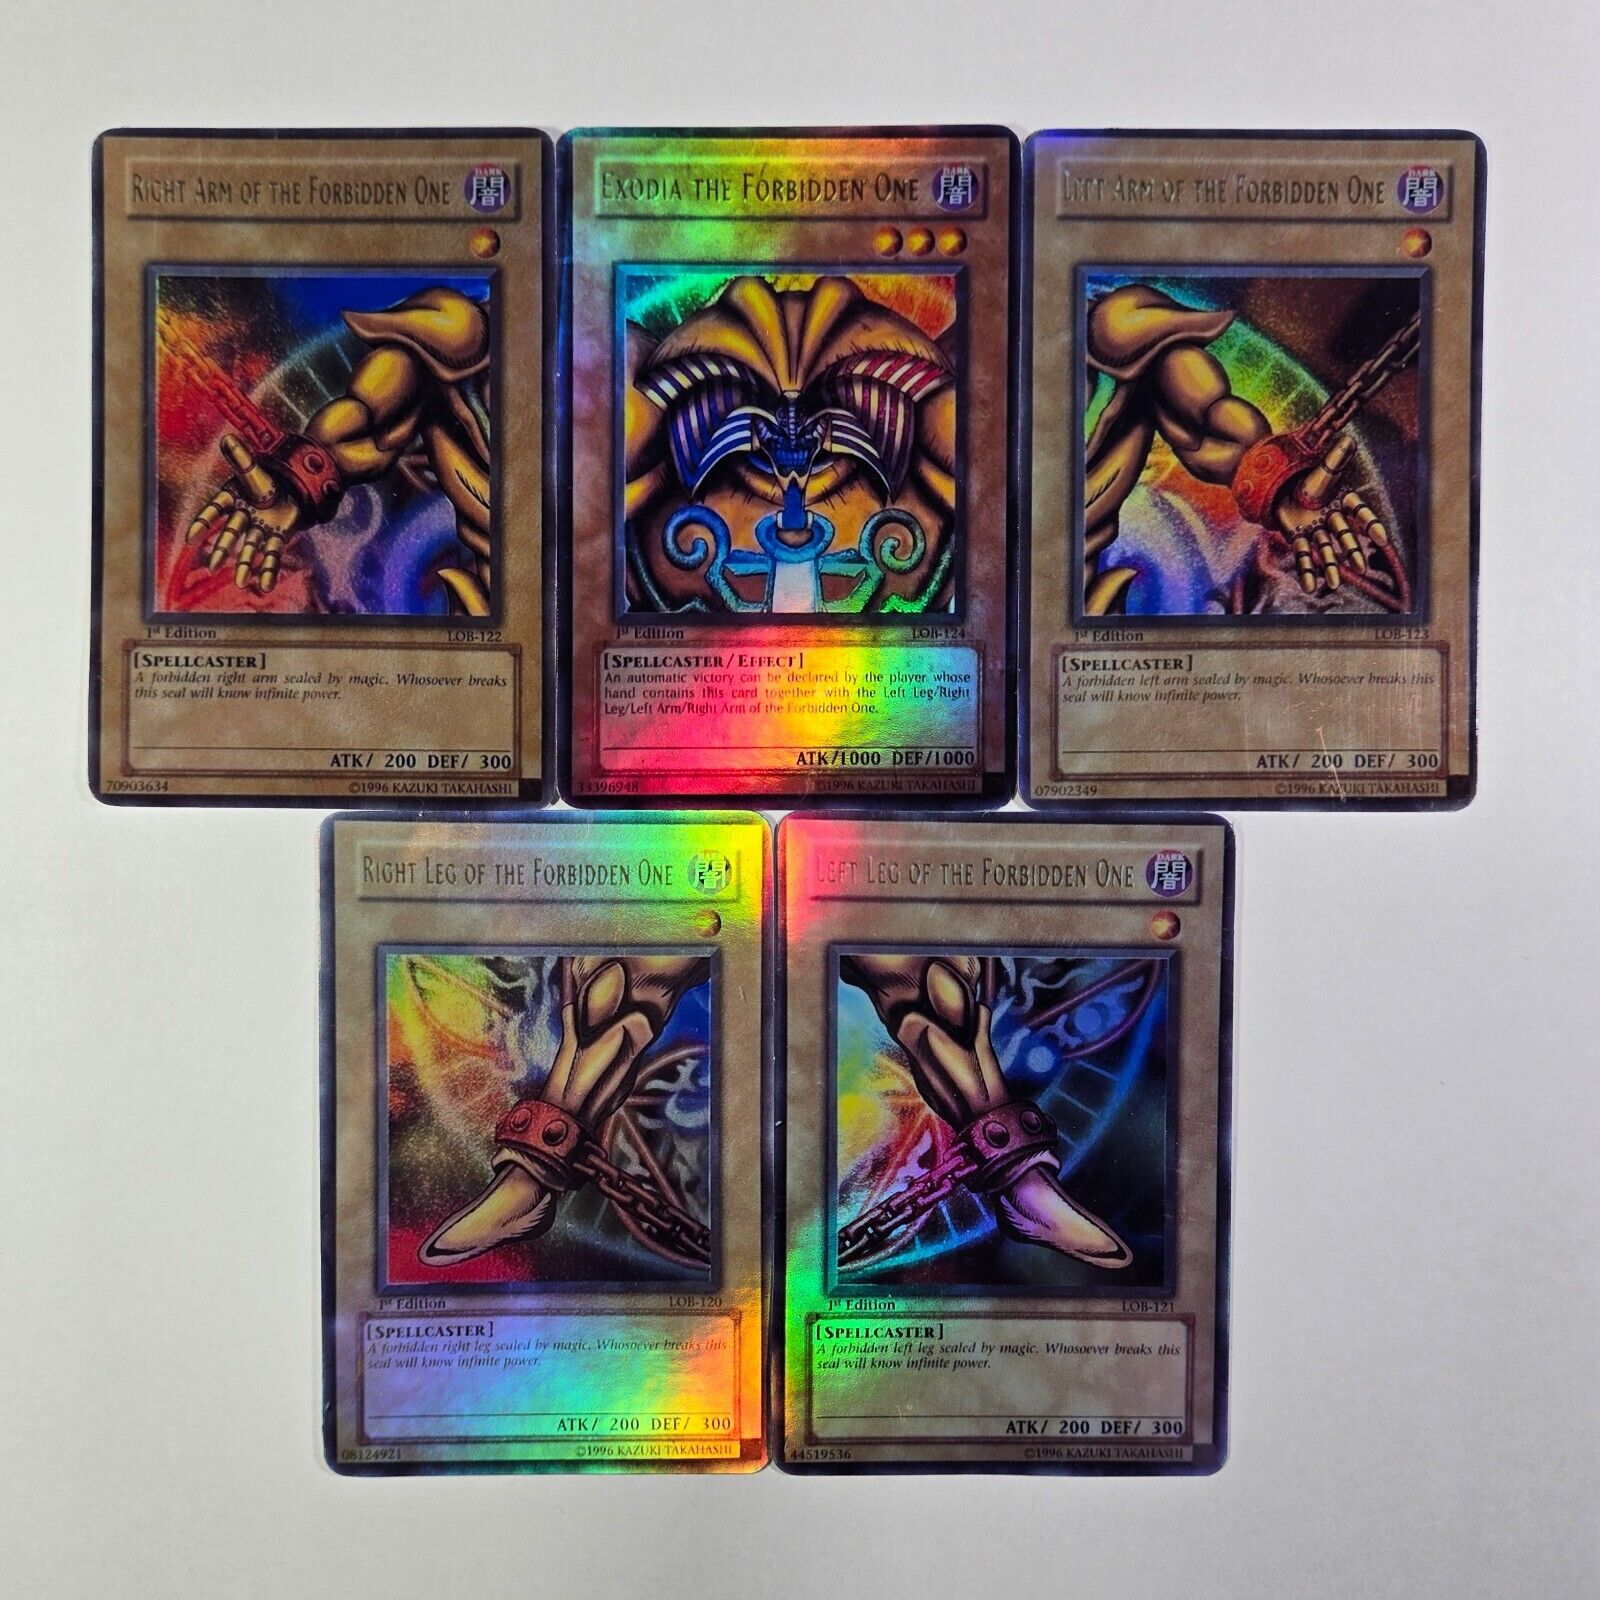 Magnet or Sticker Yugioh Exodia The Forbidden One 1st Edition LOB Set, NOT REAL